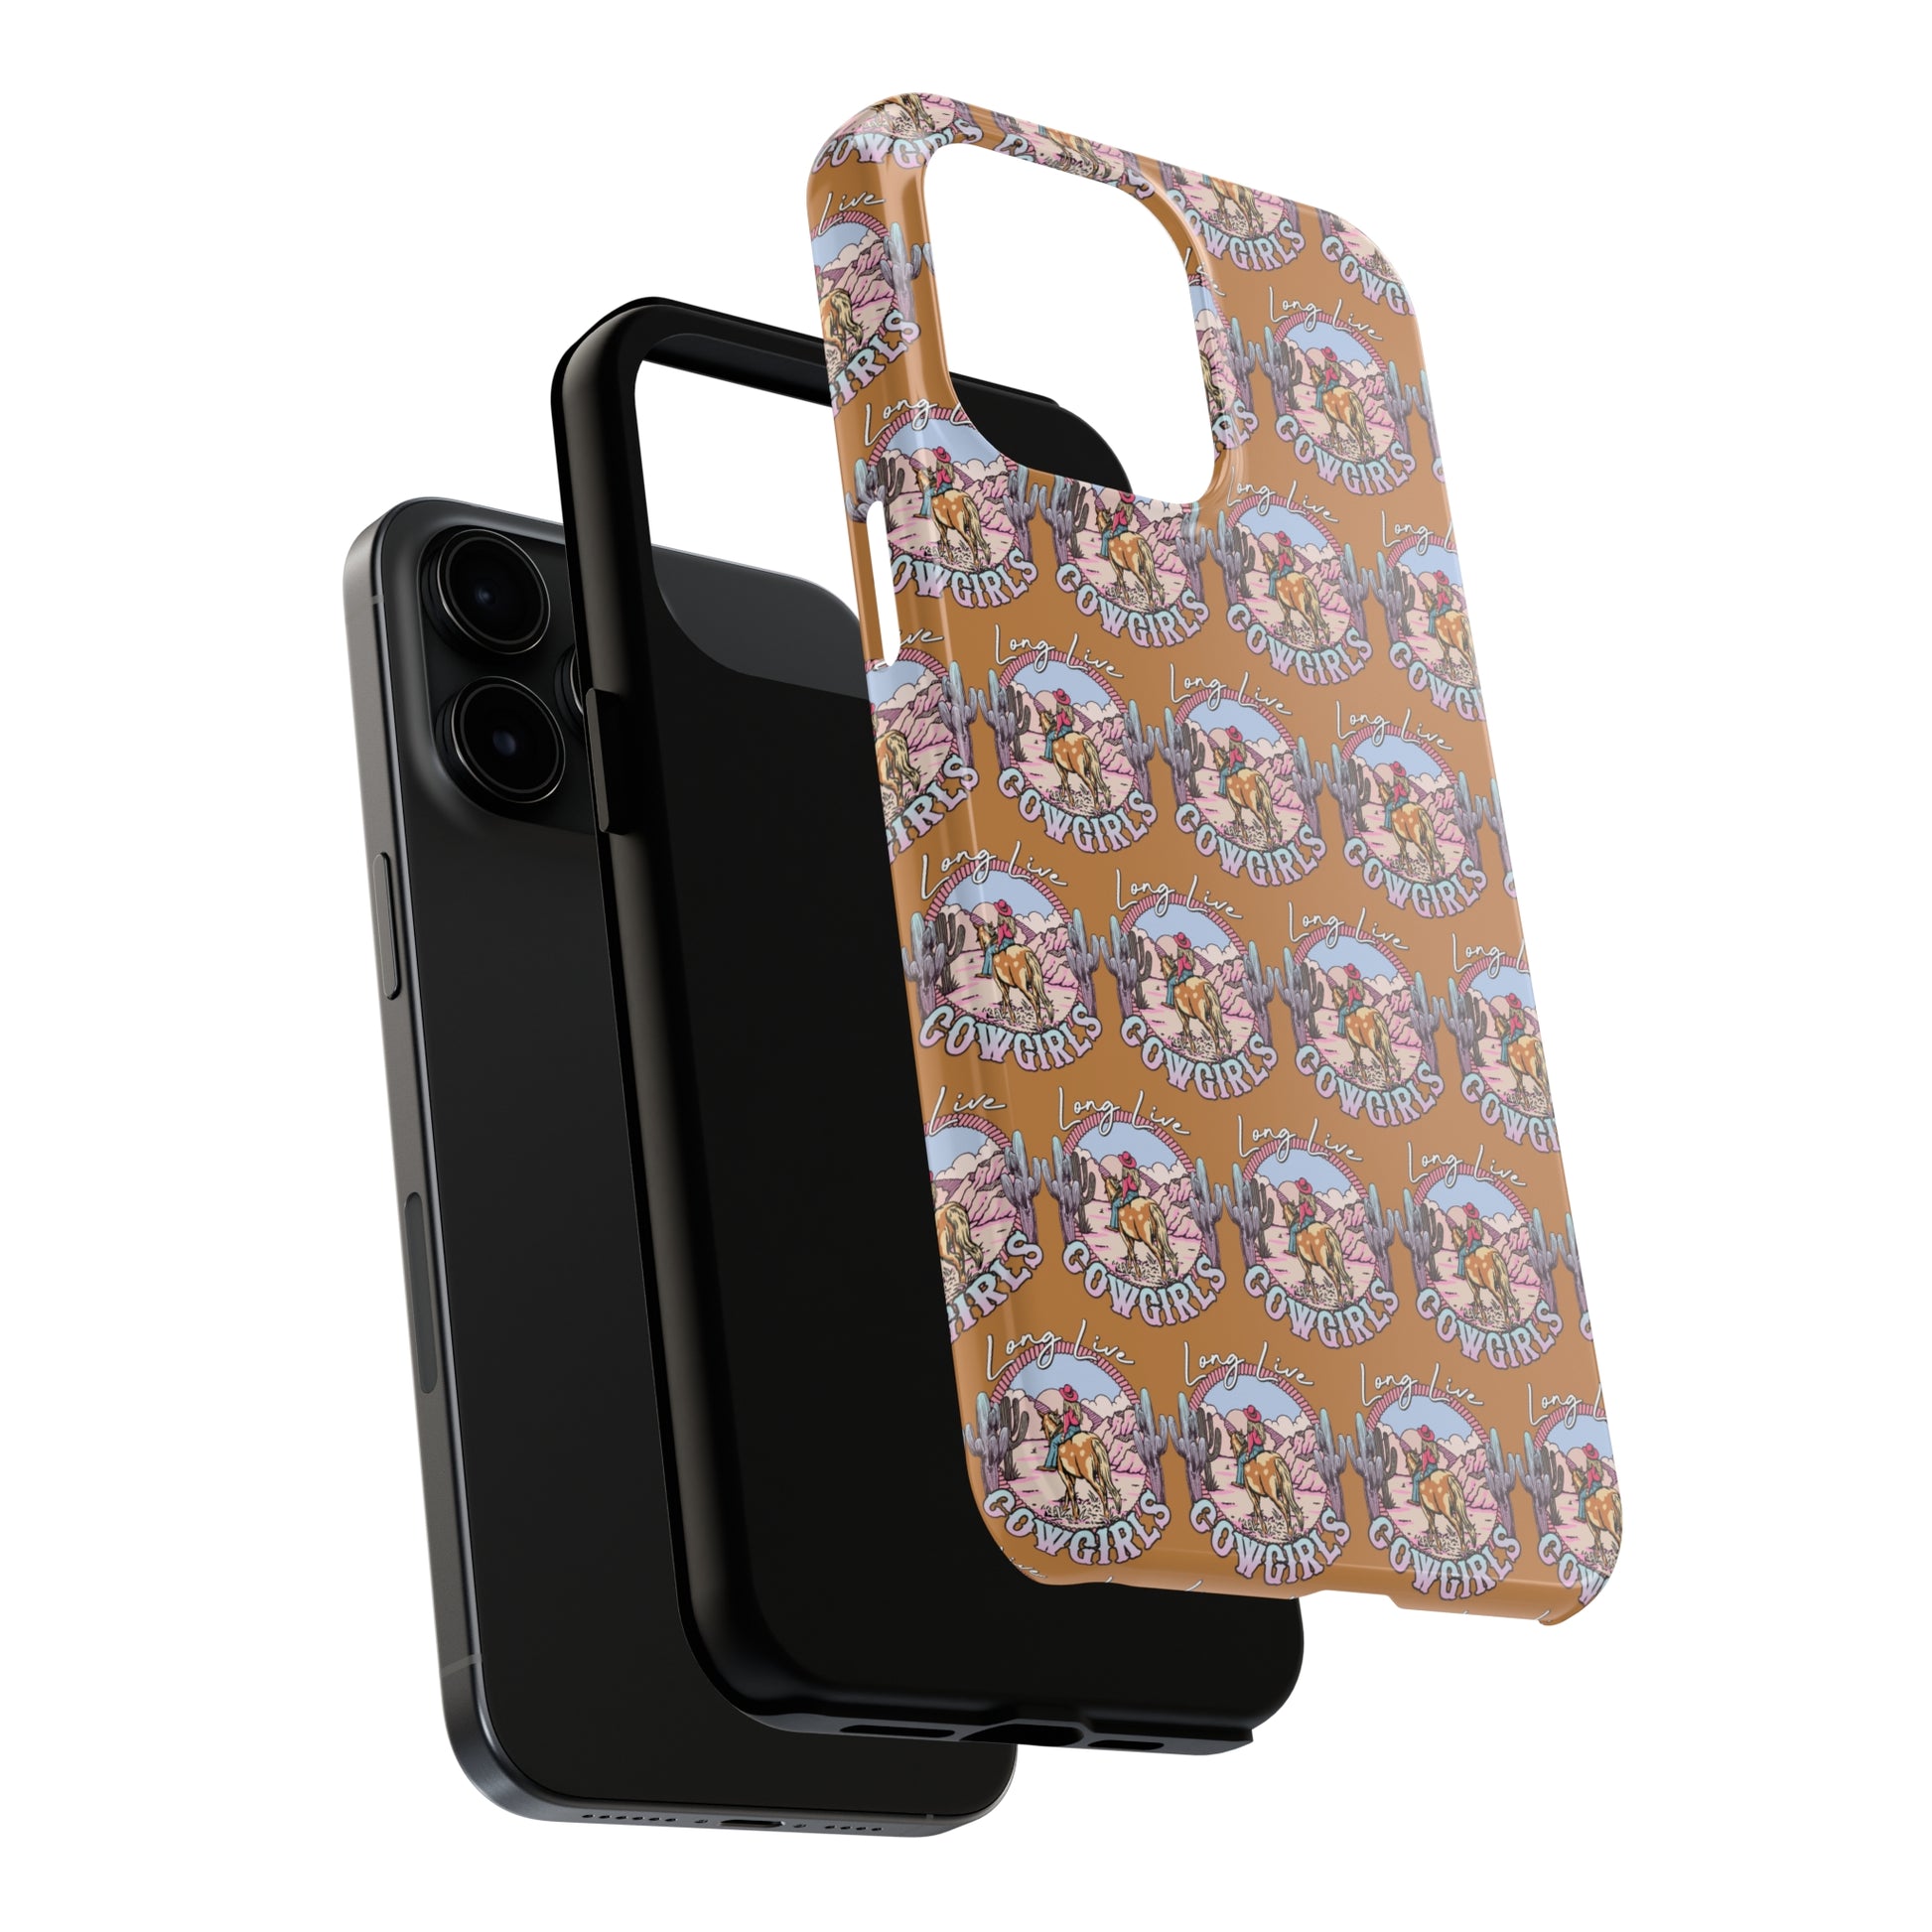 Long Live Cowgirls: iPhone Tough Case Design - Wireless Charging - Superior Protection - Original Designs by TheGlassyLass.com